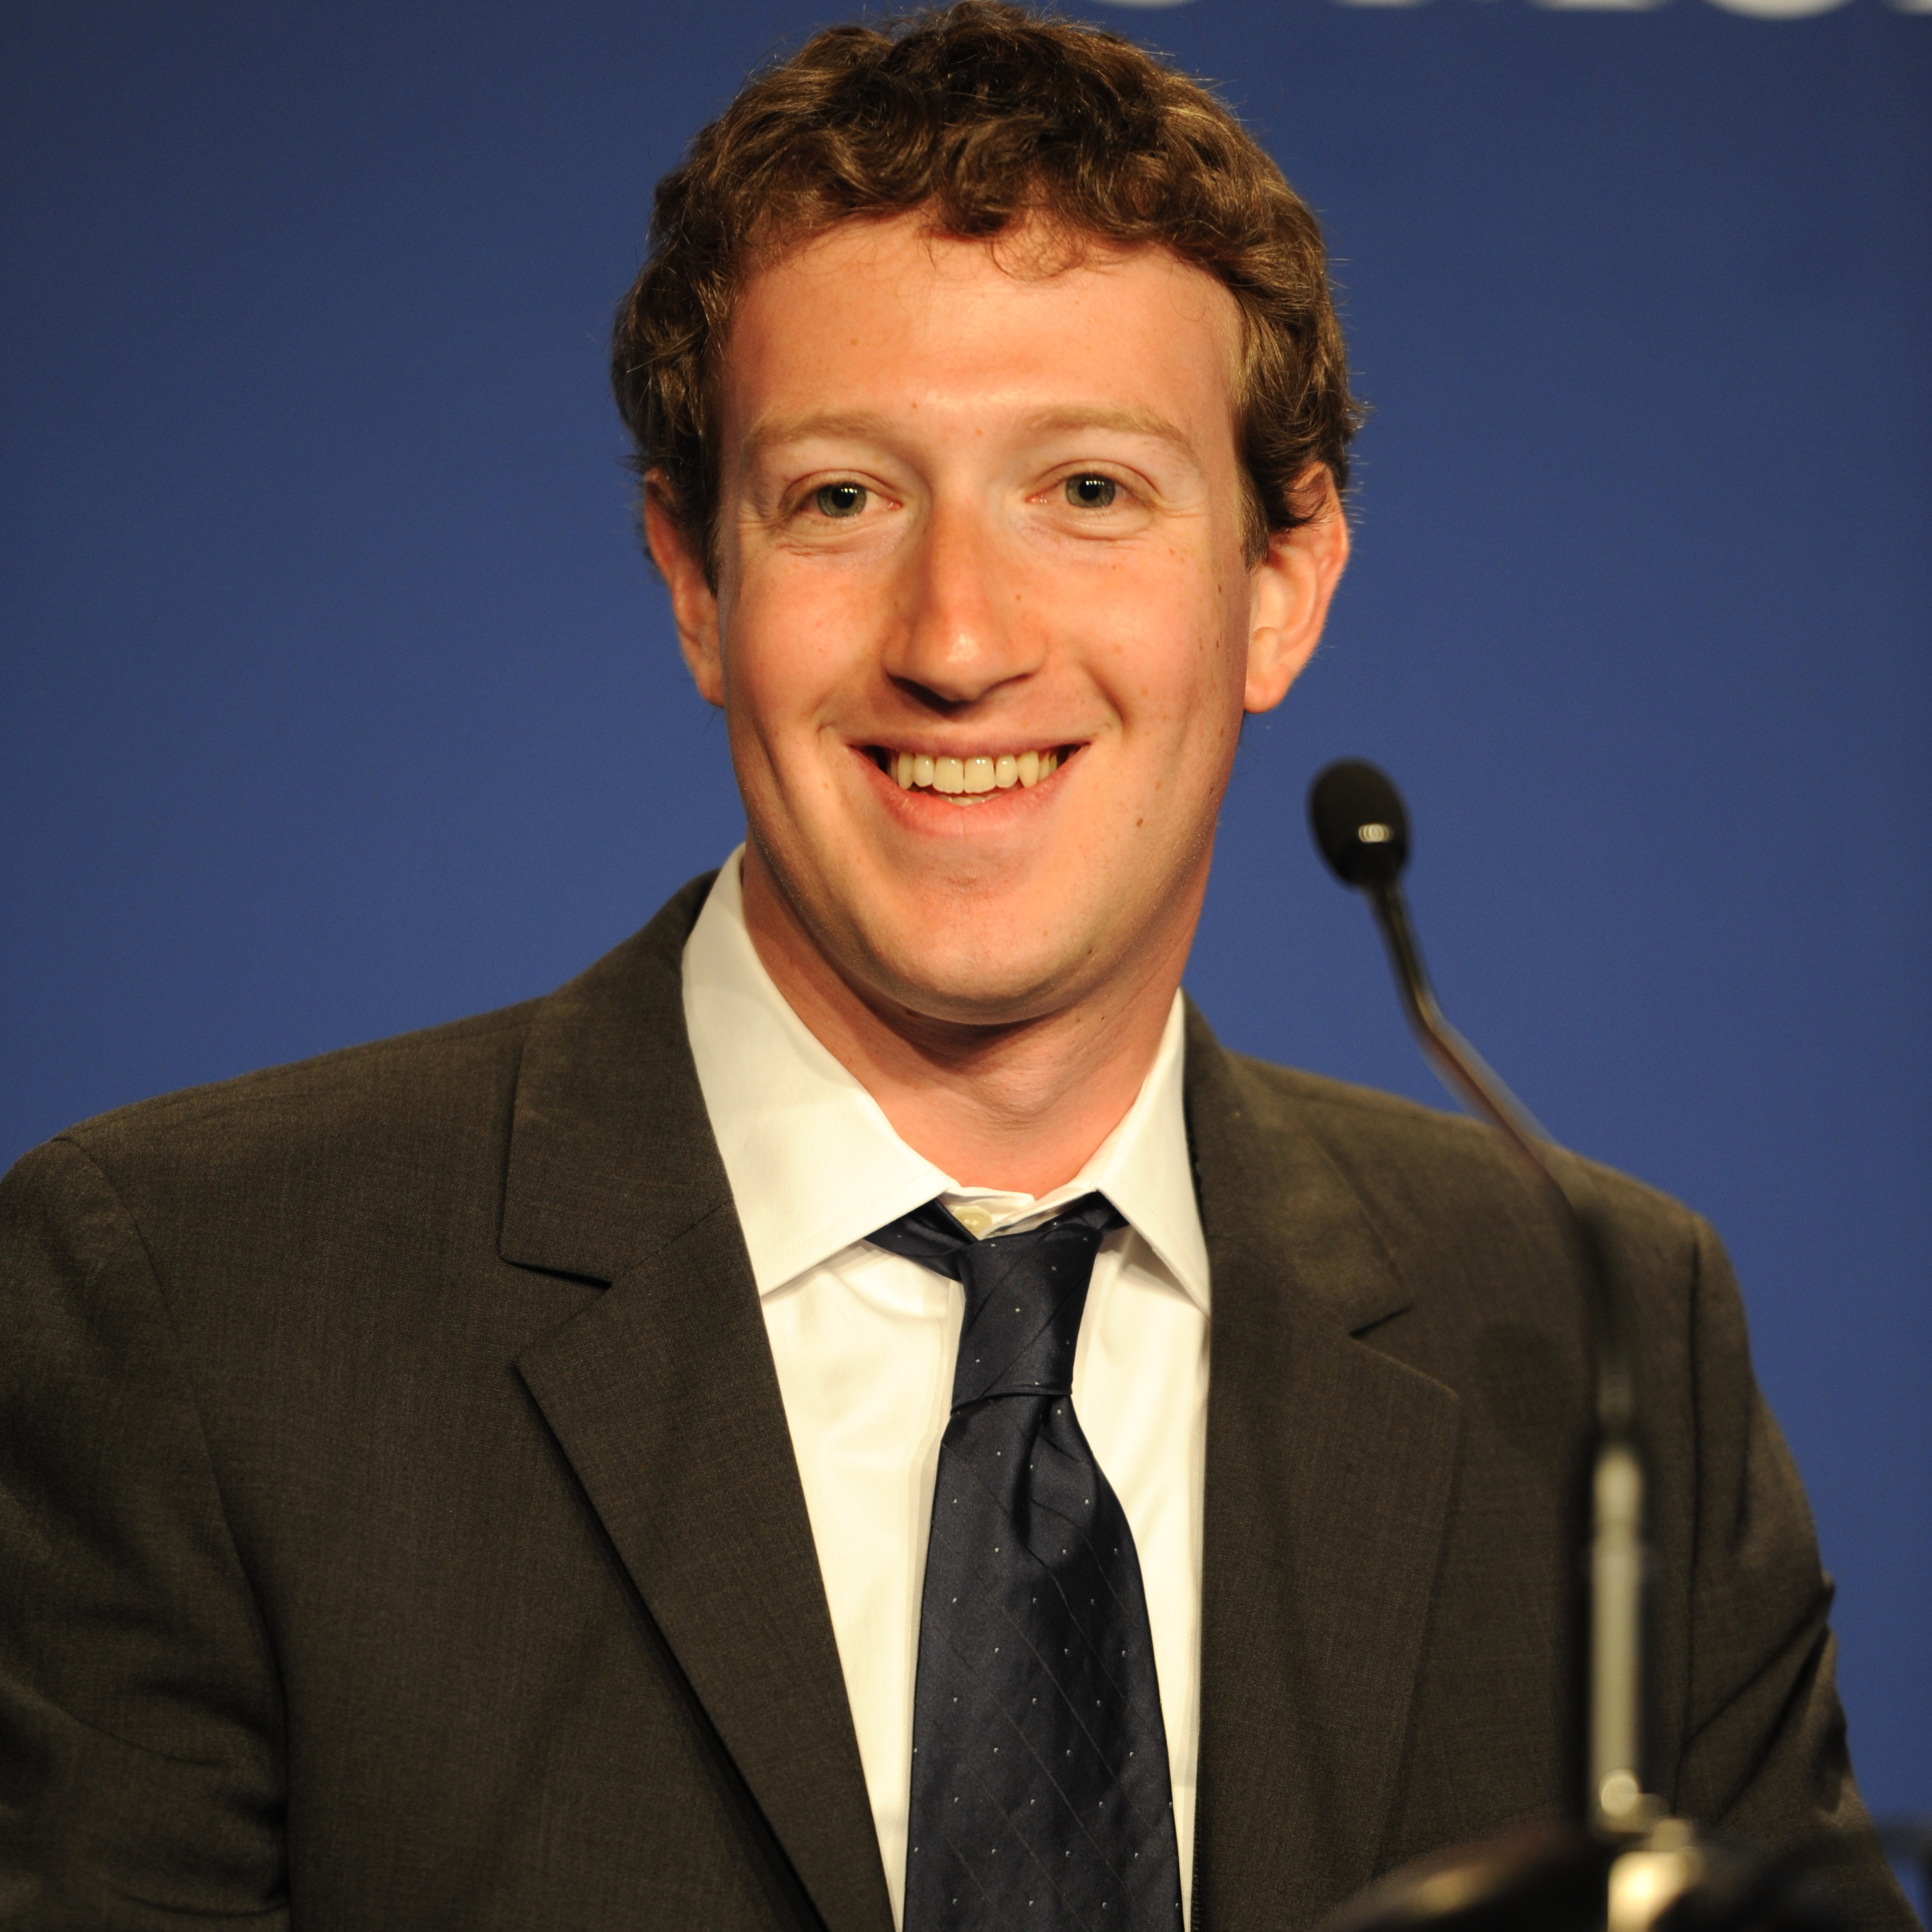 3. A Closer Look at Mark Zuckerberg's Investments: Does a Yacht Fit His Financial Profile?